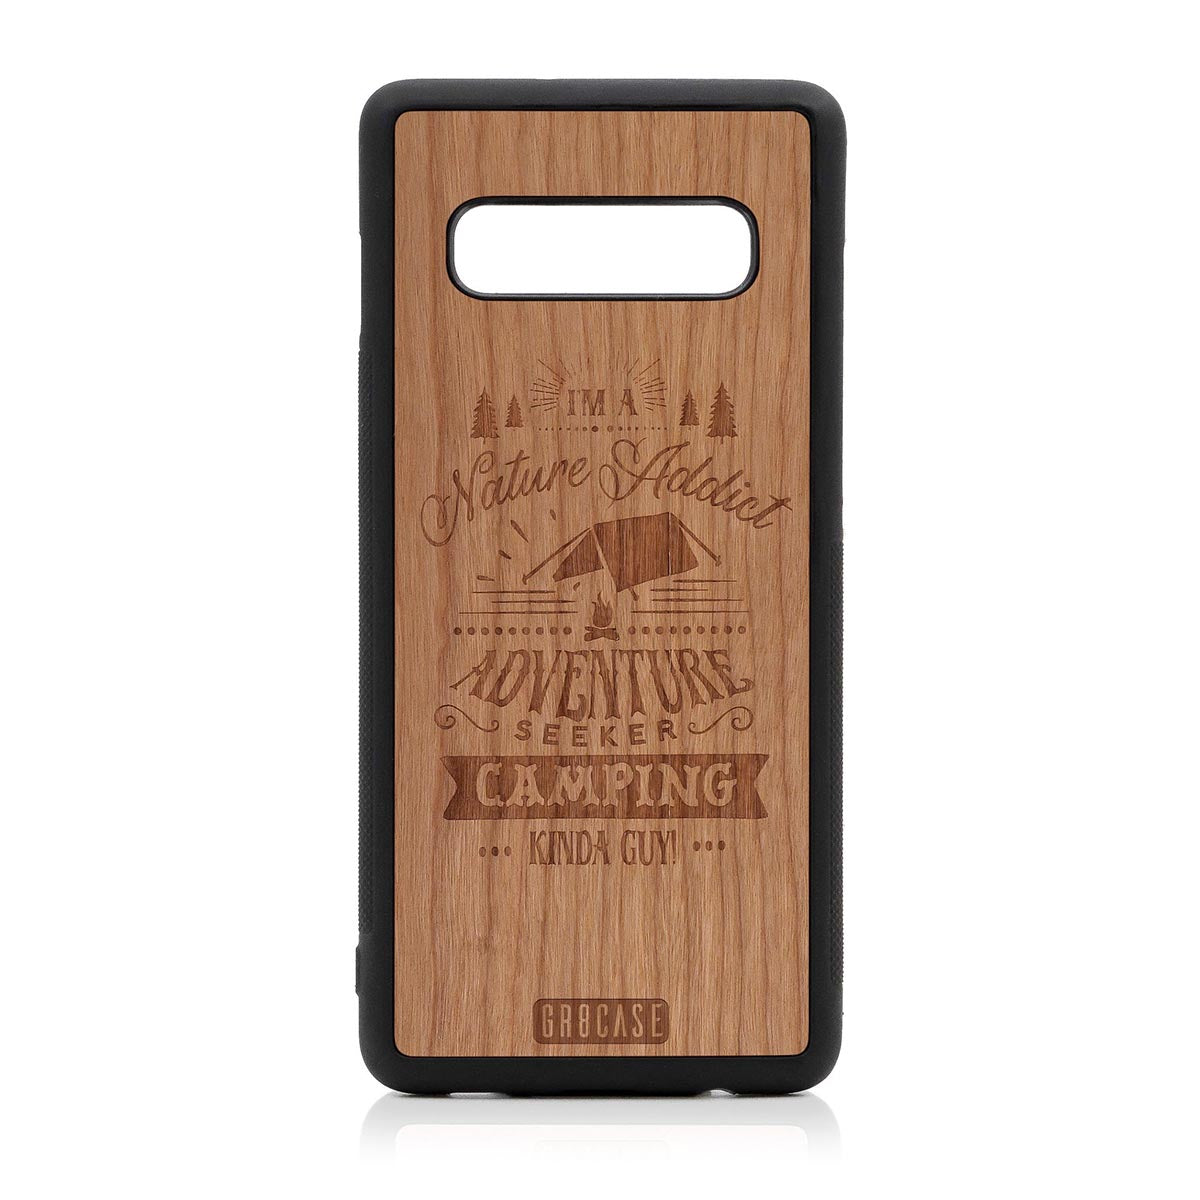 I'm A Nature Addict Adventure Seeker Camping Kinda Guy Design Wood Case Samsung Galaxy S10 Plus by GR8CASE